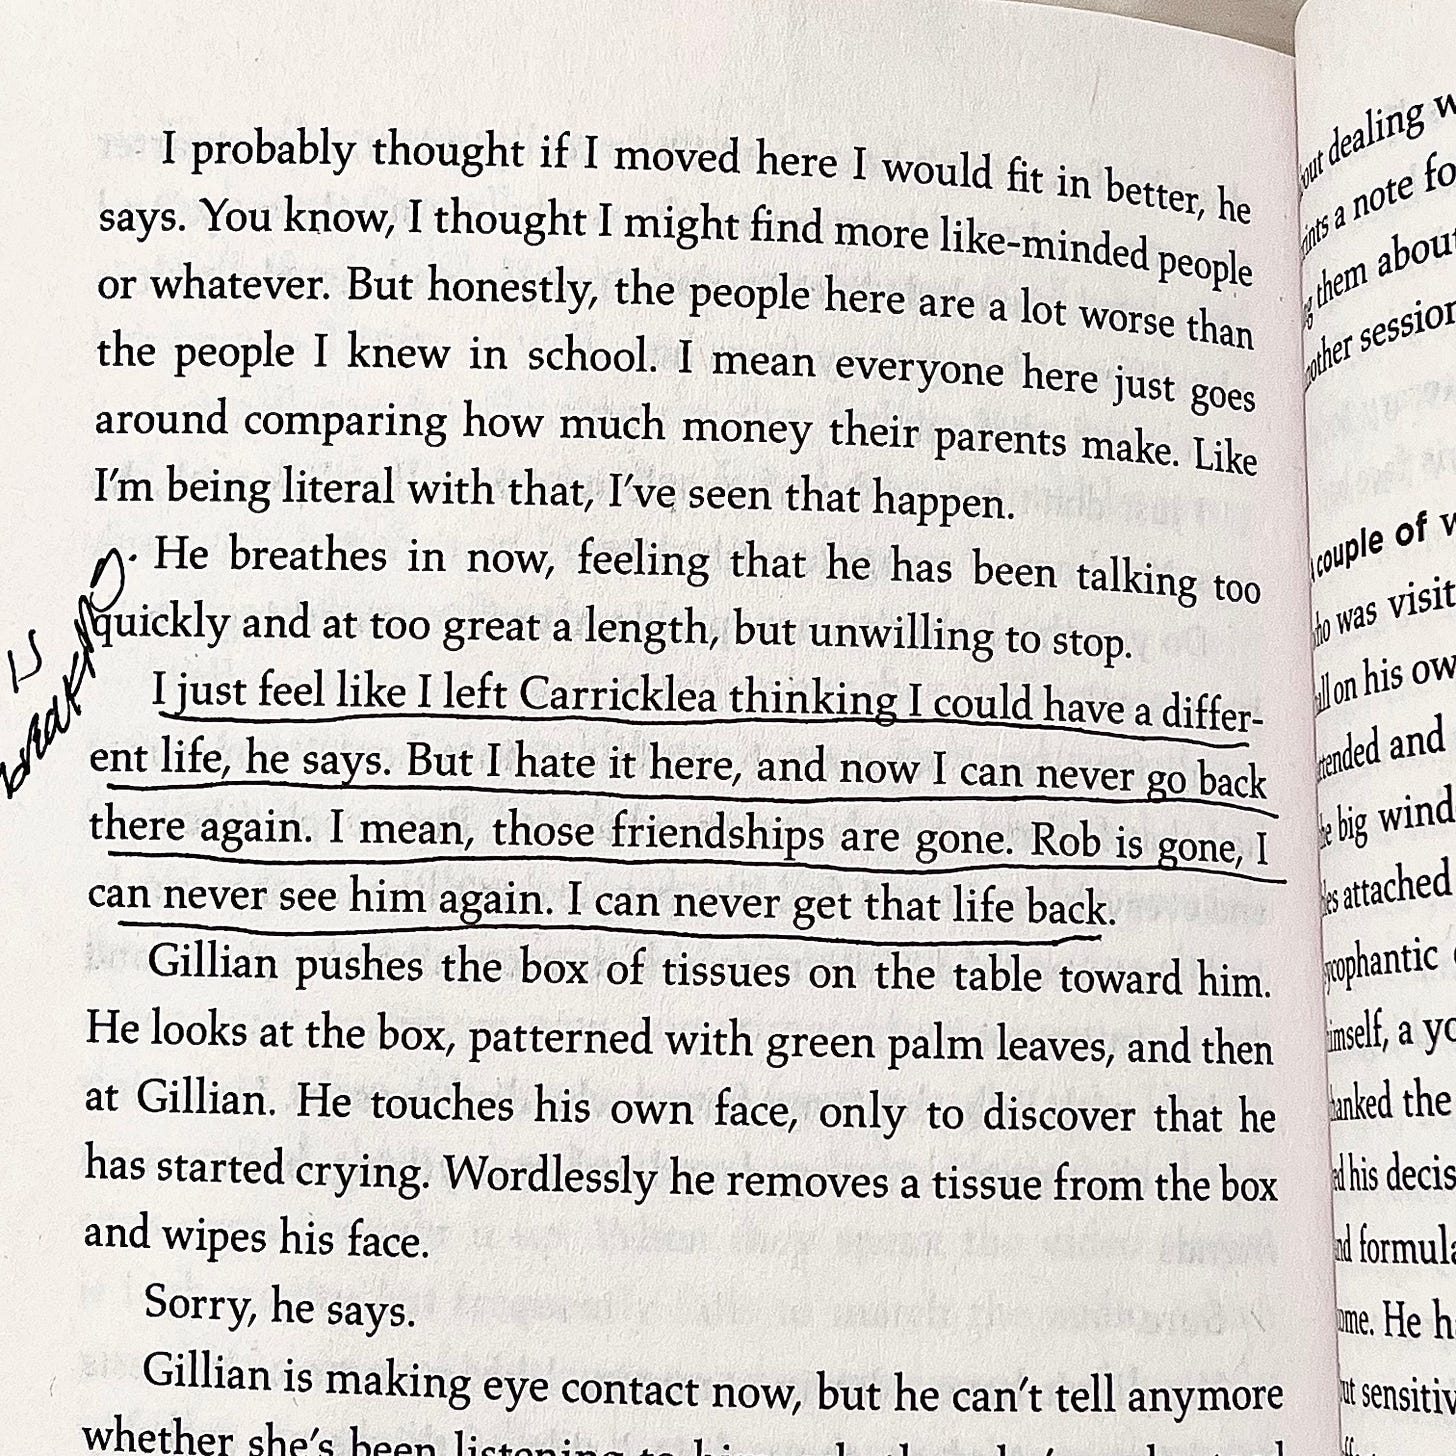 I just feel like I left Carricklea thinking I could have a different life, he says. But I hate it here, and now I can never go back there again. I mean, those friendships are gone. Rob is gone, I can never see him again. I can never get that life back. Sally Rooney Normal People